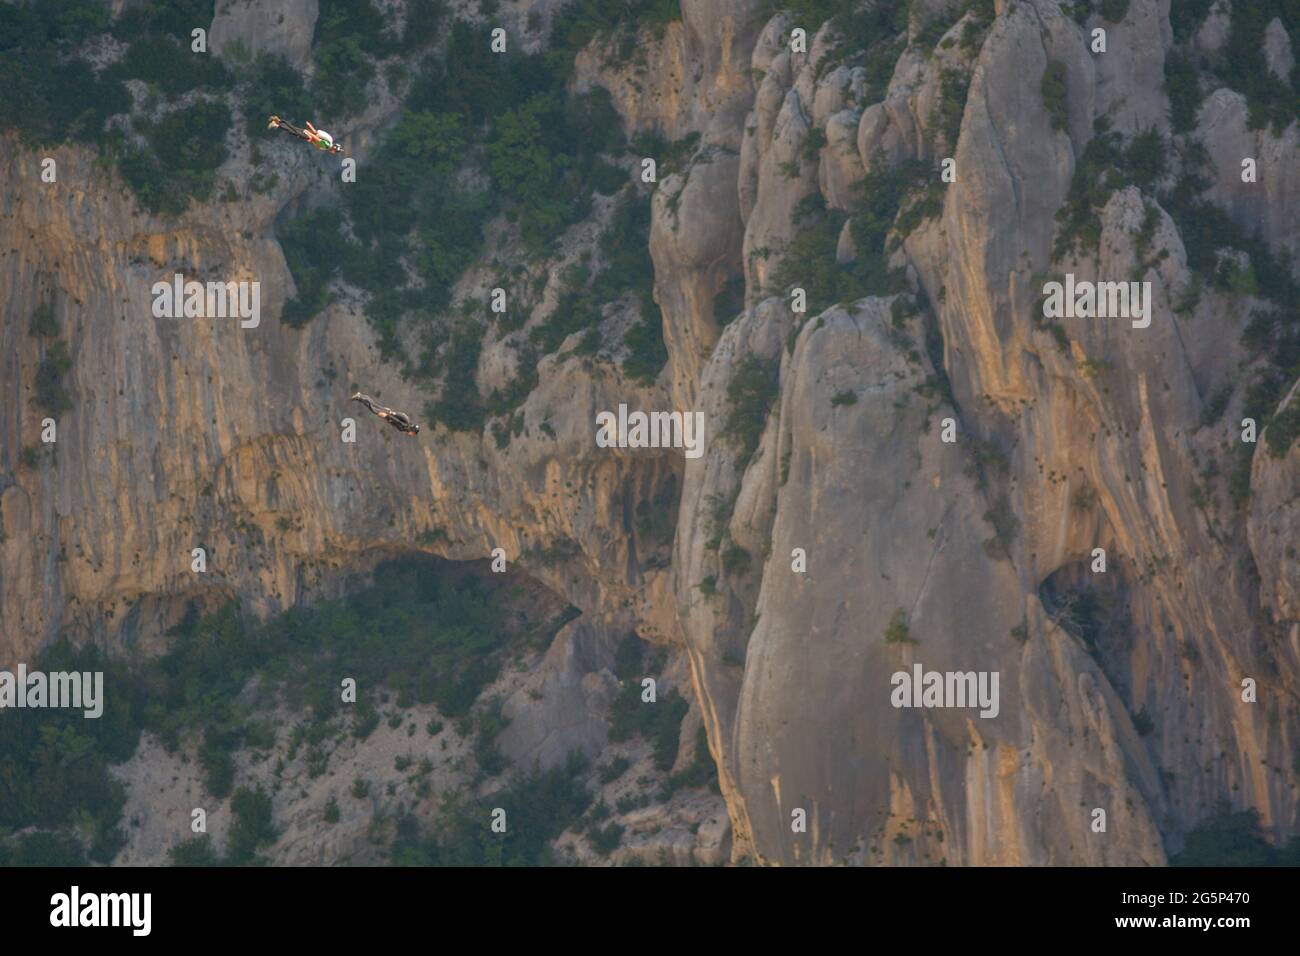 Base-jump jumping in the Verdon gorges, extreme jumping, extreme sport consisting of parachute jumping. Stock Photo